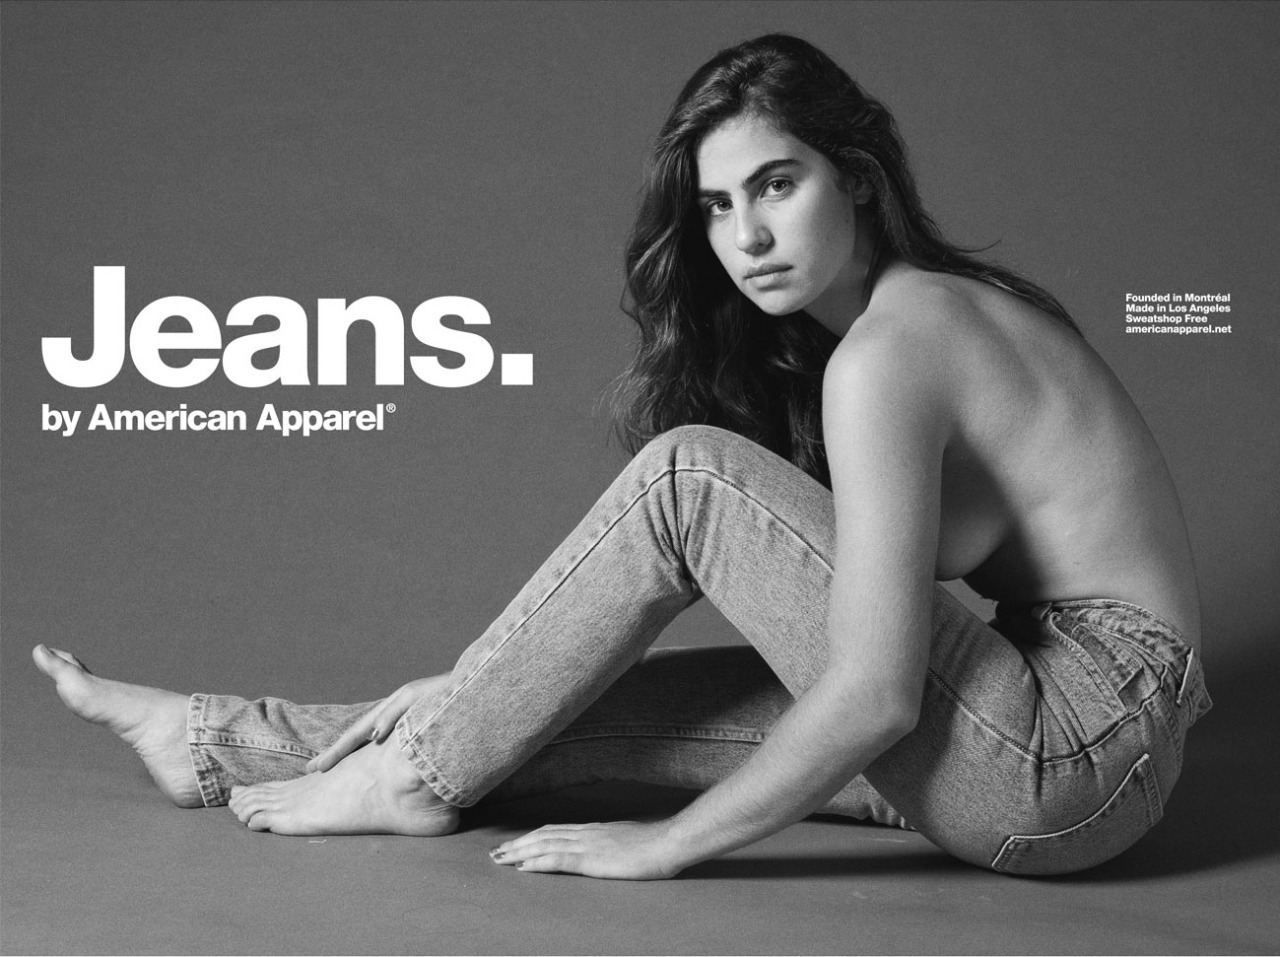 American Apparel sexy advert. American Apparel’s advertising is famous for the